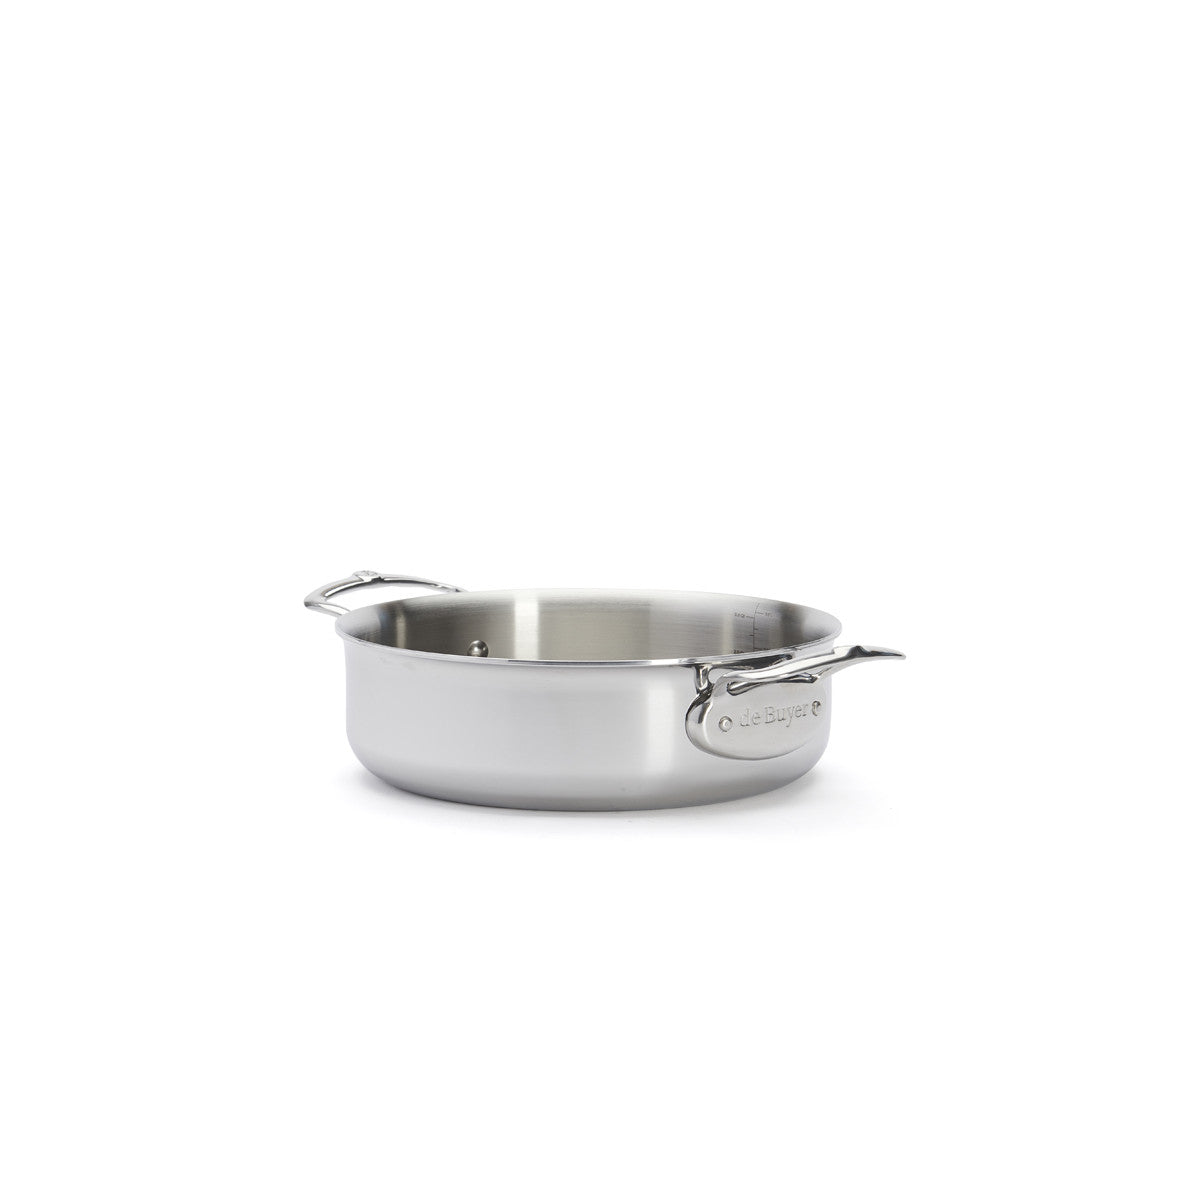 Affinity sauteuse with two handles and lid